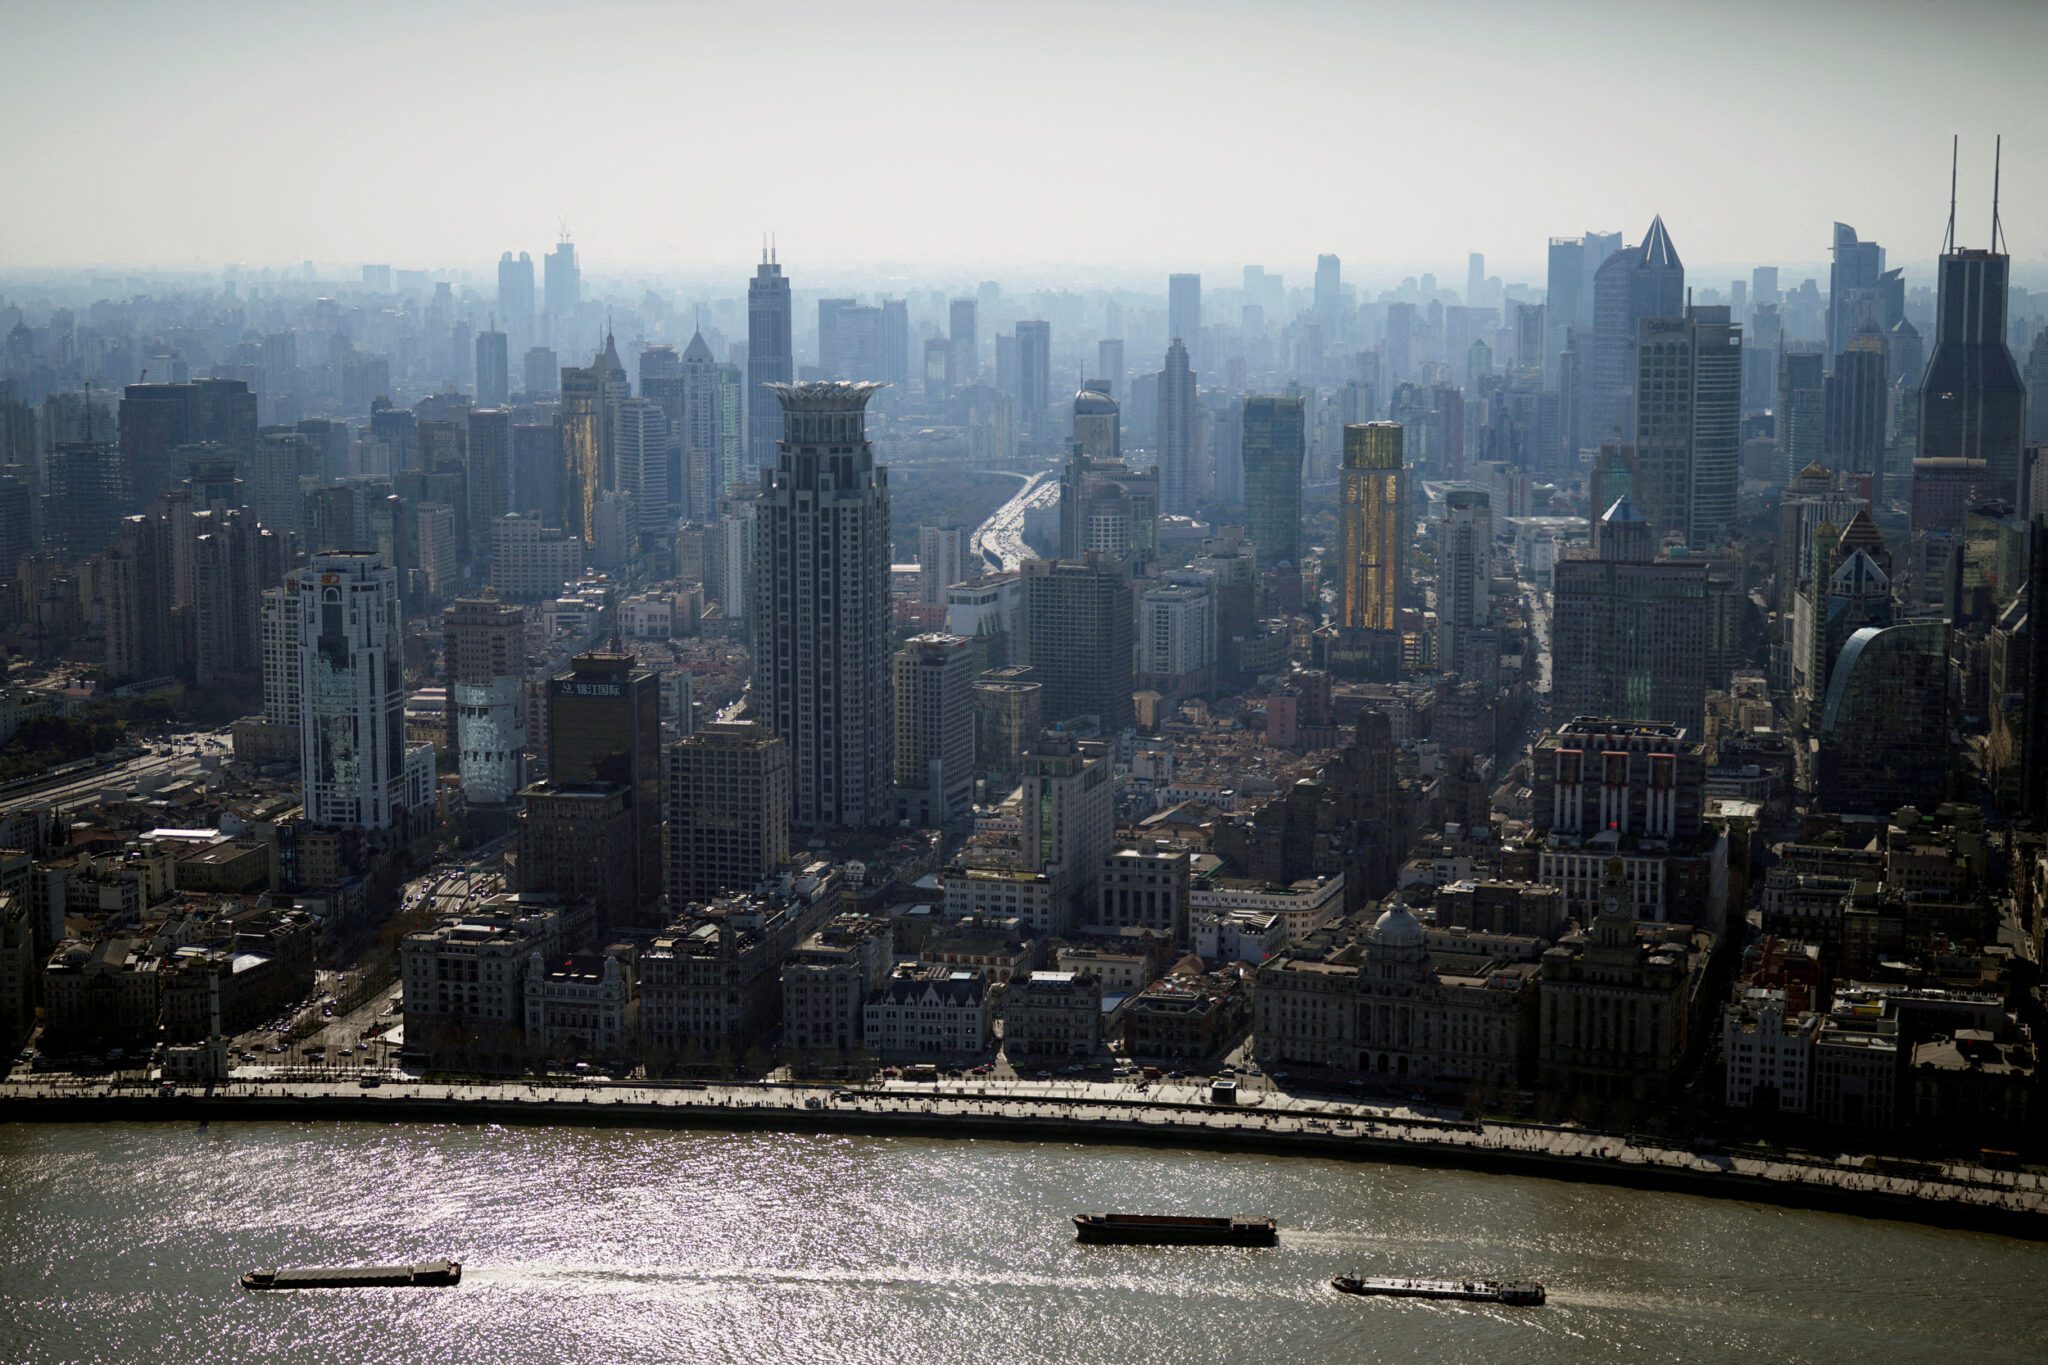 A file photo view of the Huangpu River and Shanghai skyline. Source: Reuters